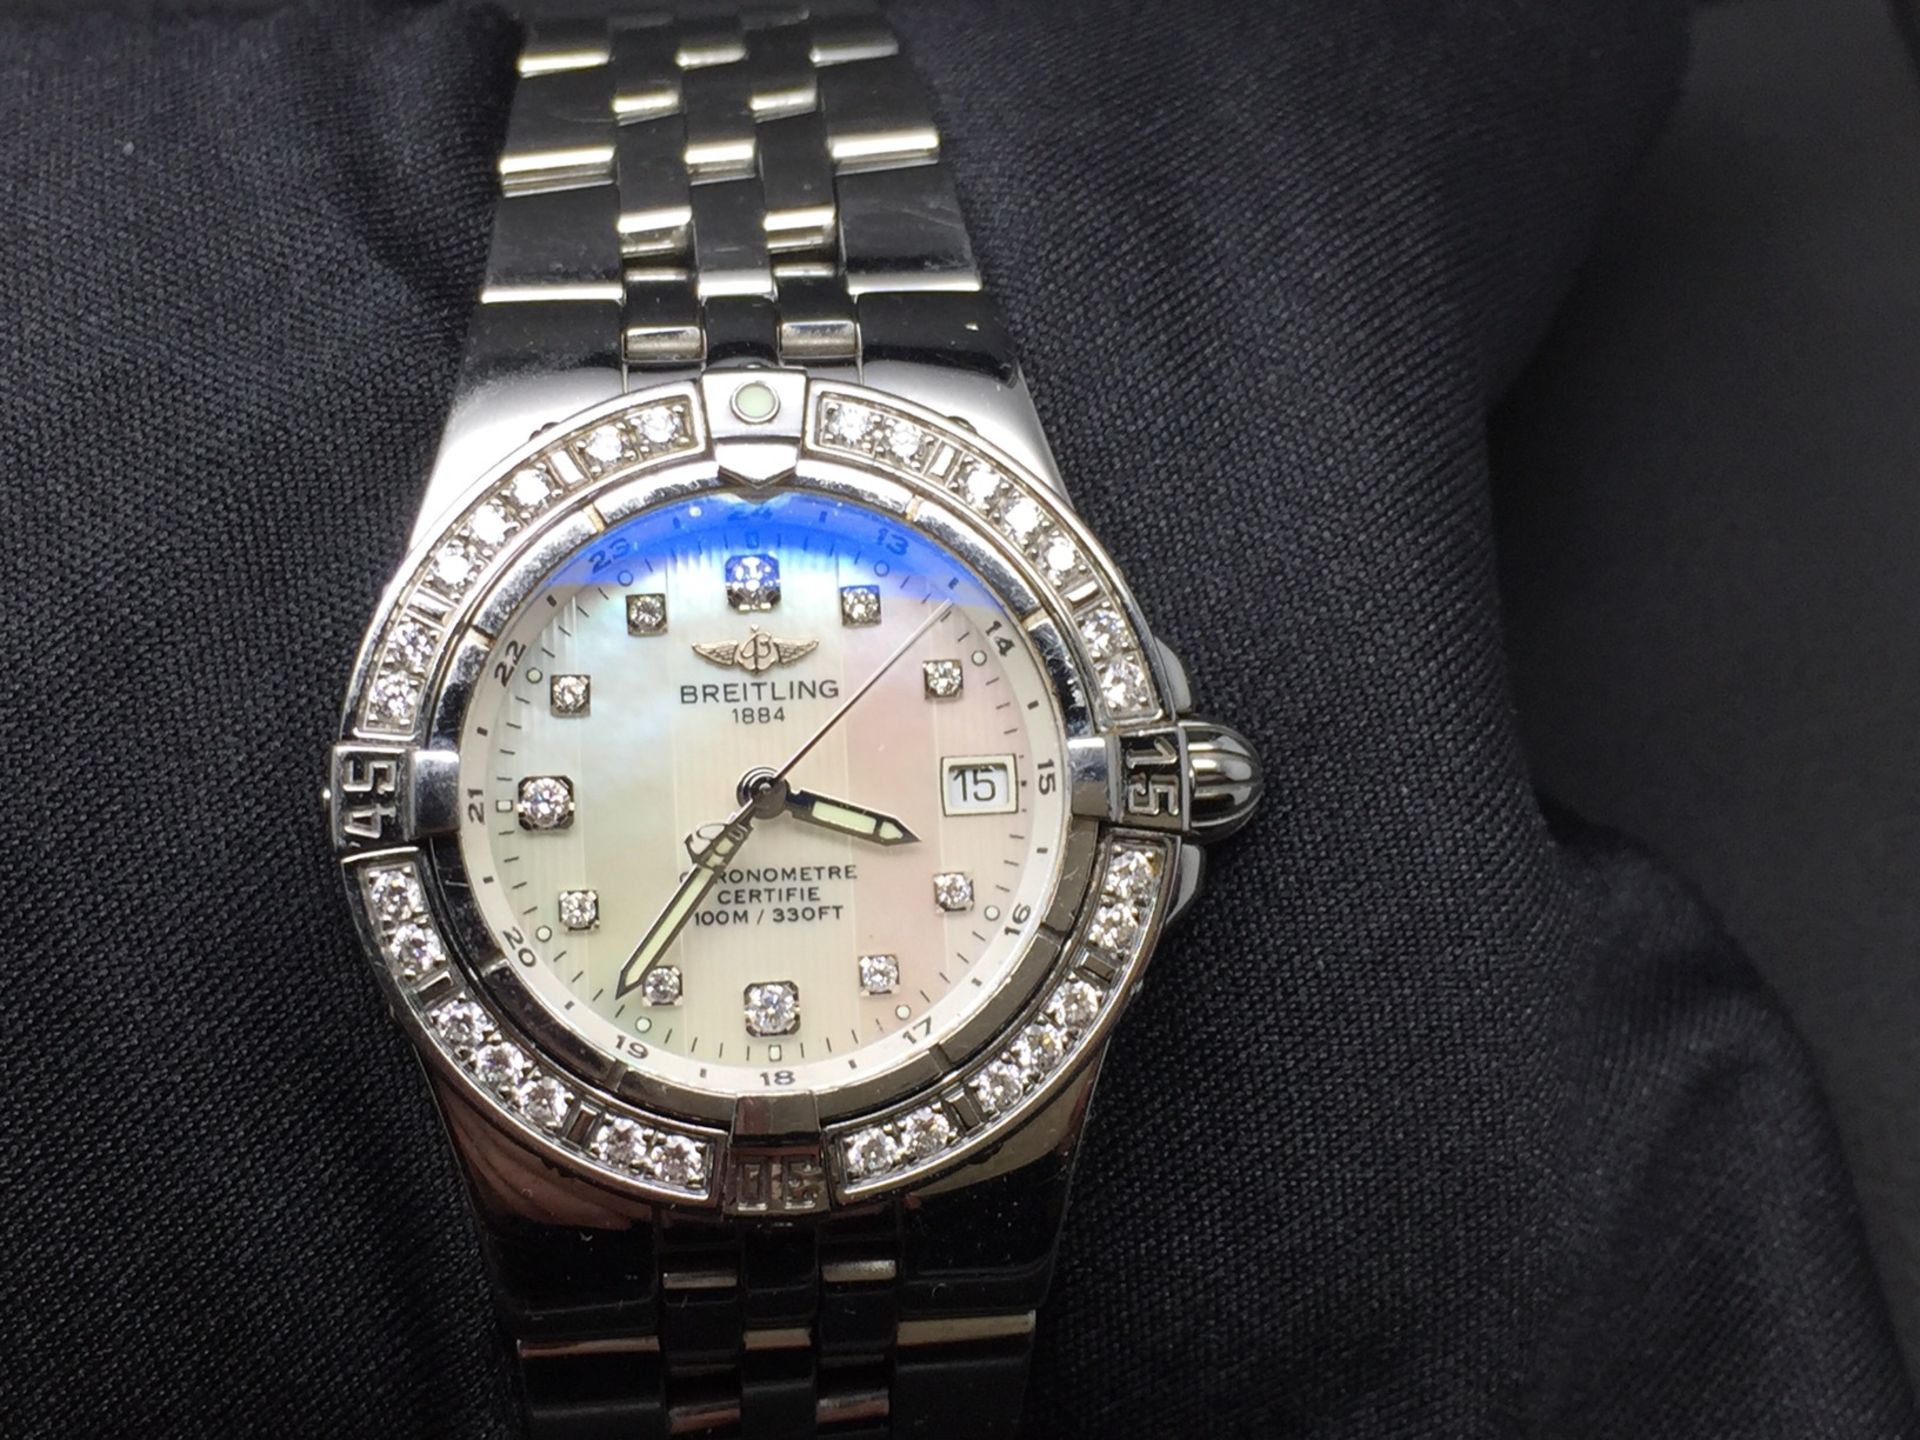 LADIES BREITLING DIAMOND WATCH * STARLINER A7134053 / A602 - Image 5 of 13